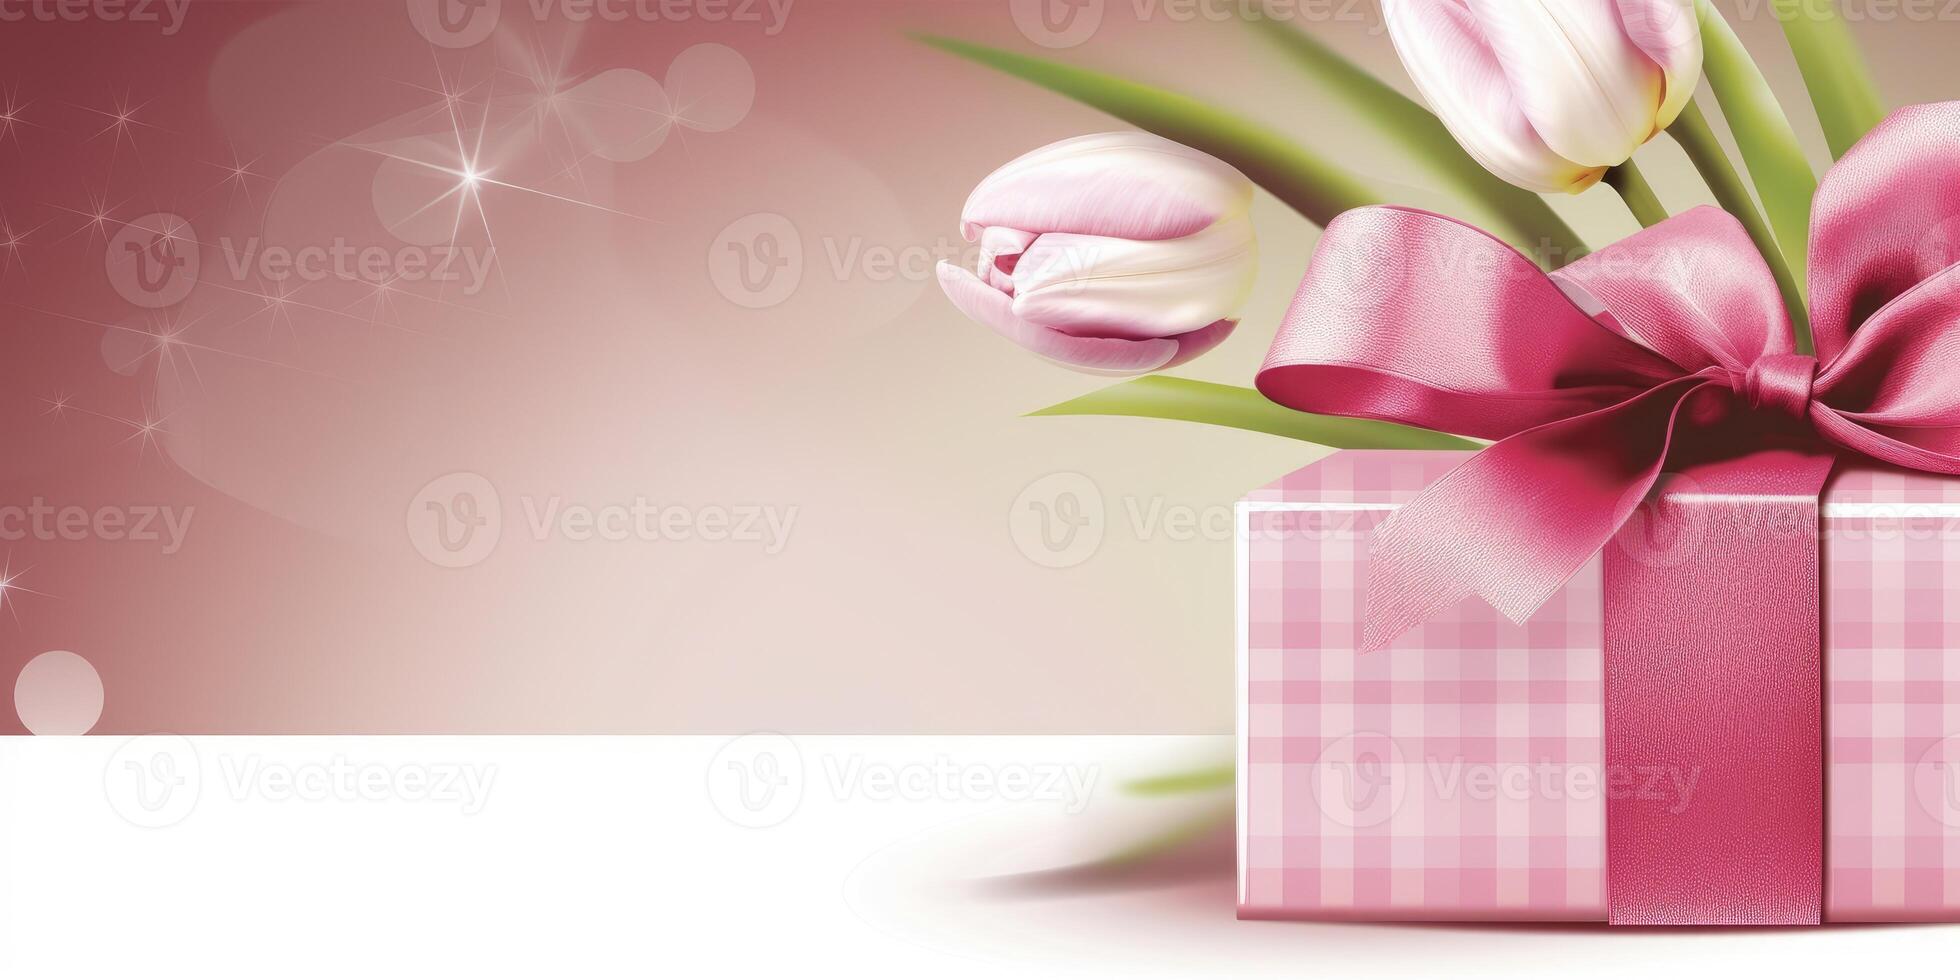 Colorful wrapped gift on a solid color background, with copy space, photo